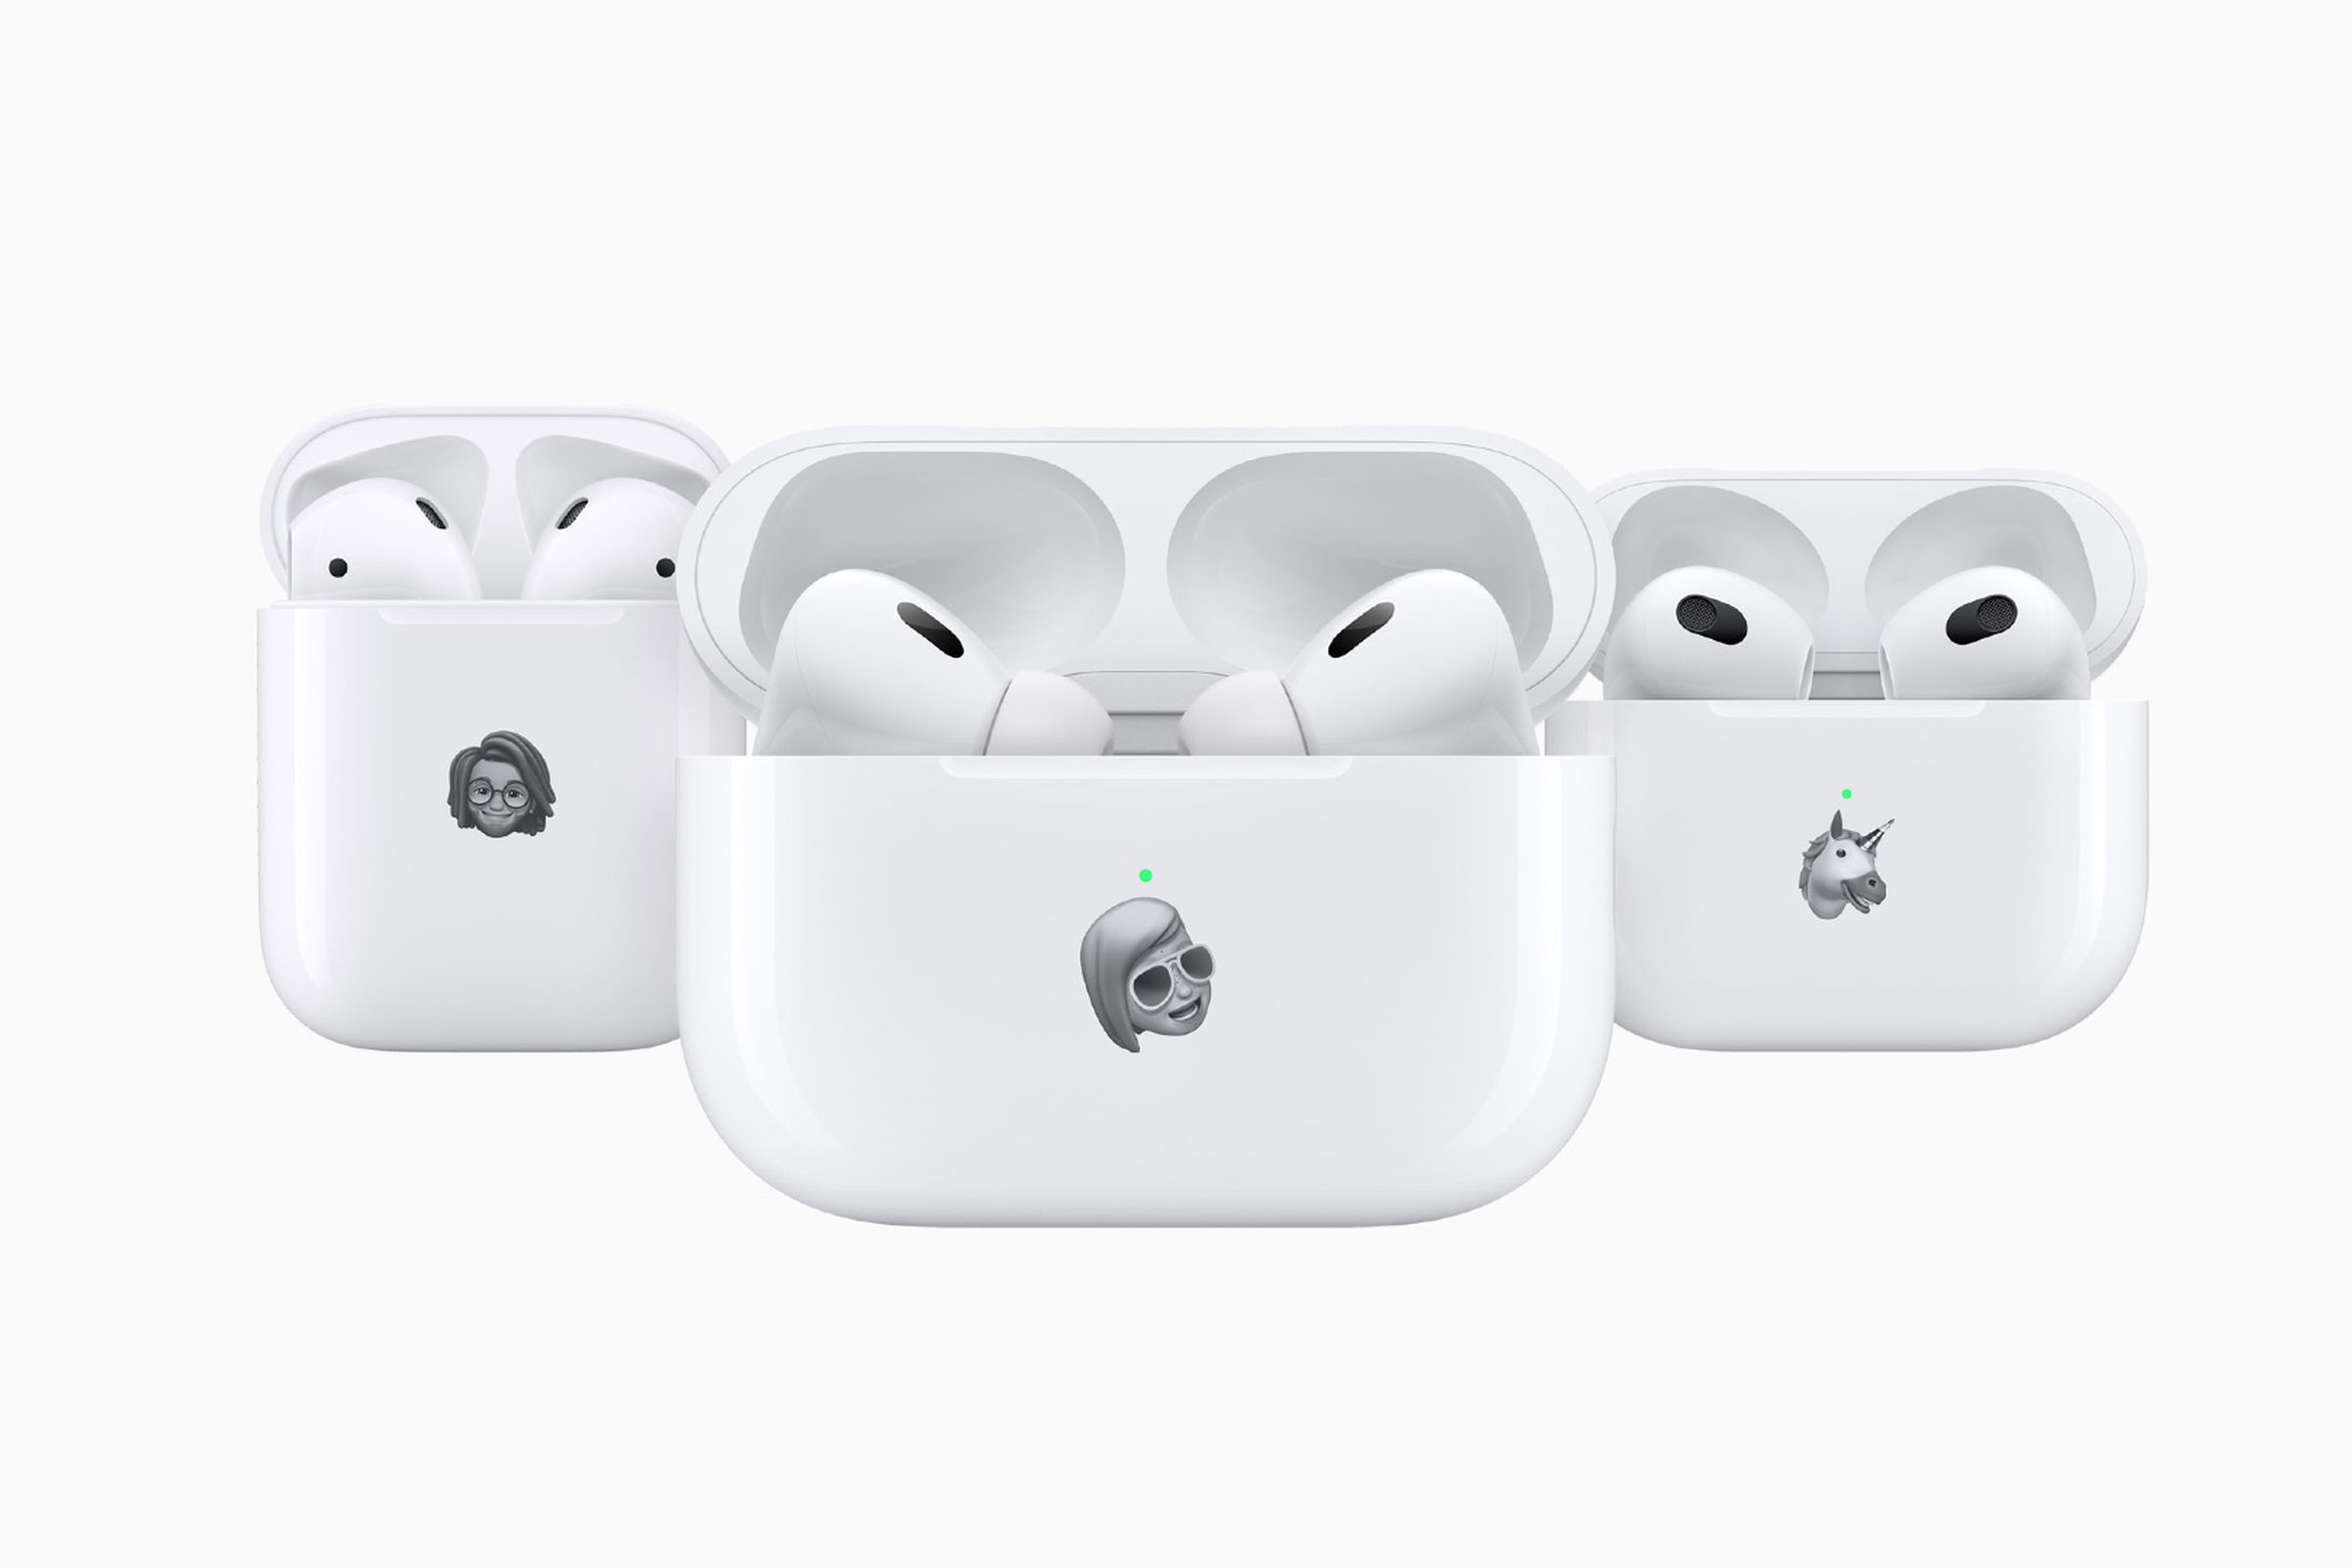 The second-gen AirPods (left), second-gen AirPods Pro (middle), and third-gen AirPods (right).